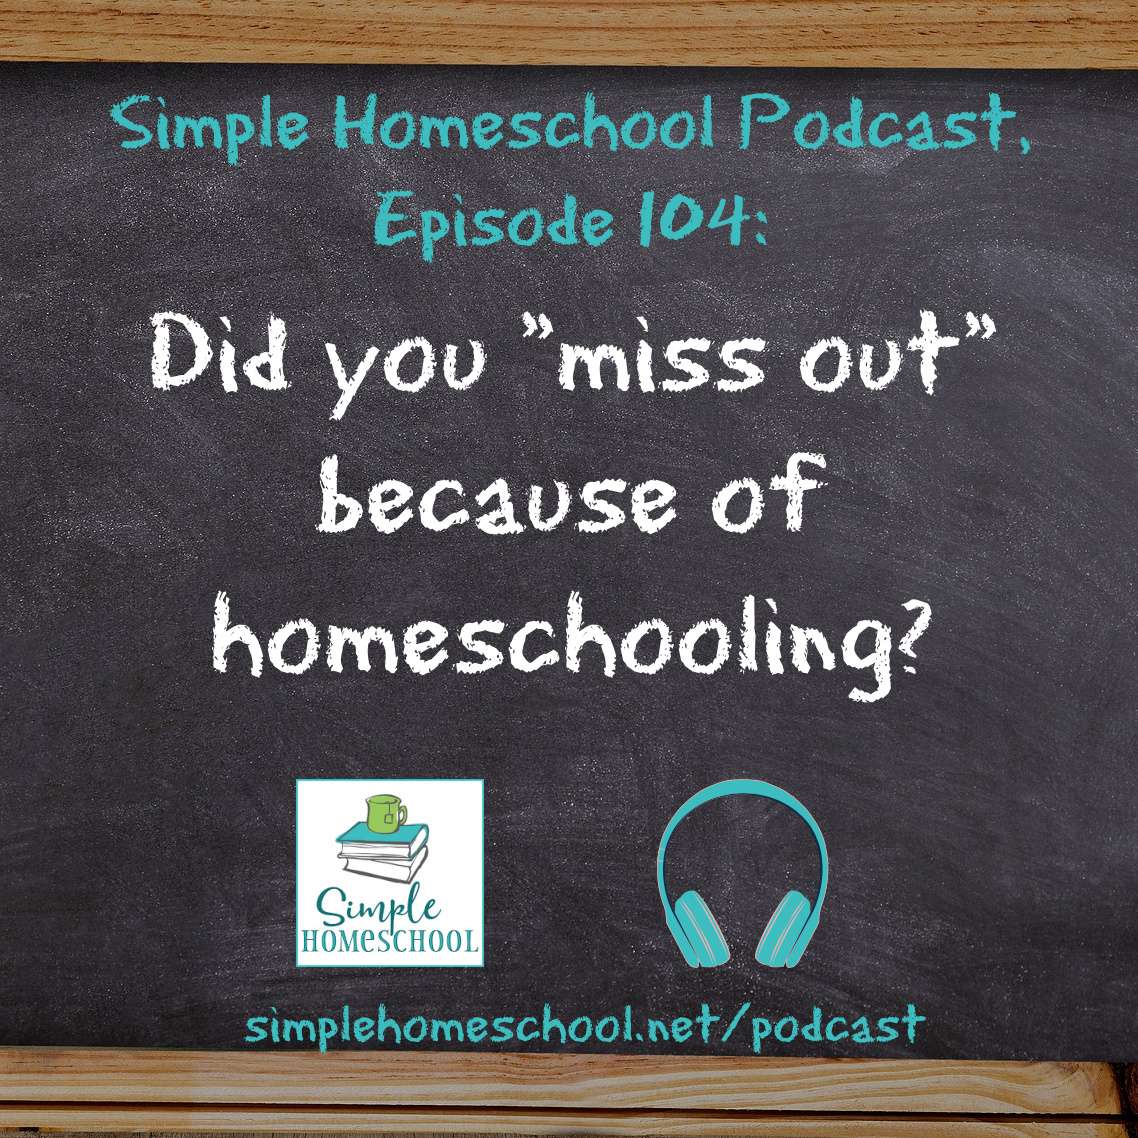 Did you "miss out" because of homeschooling?